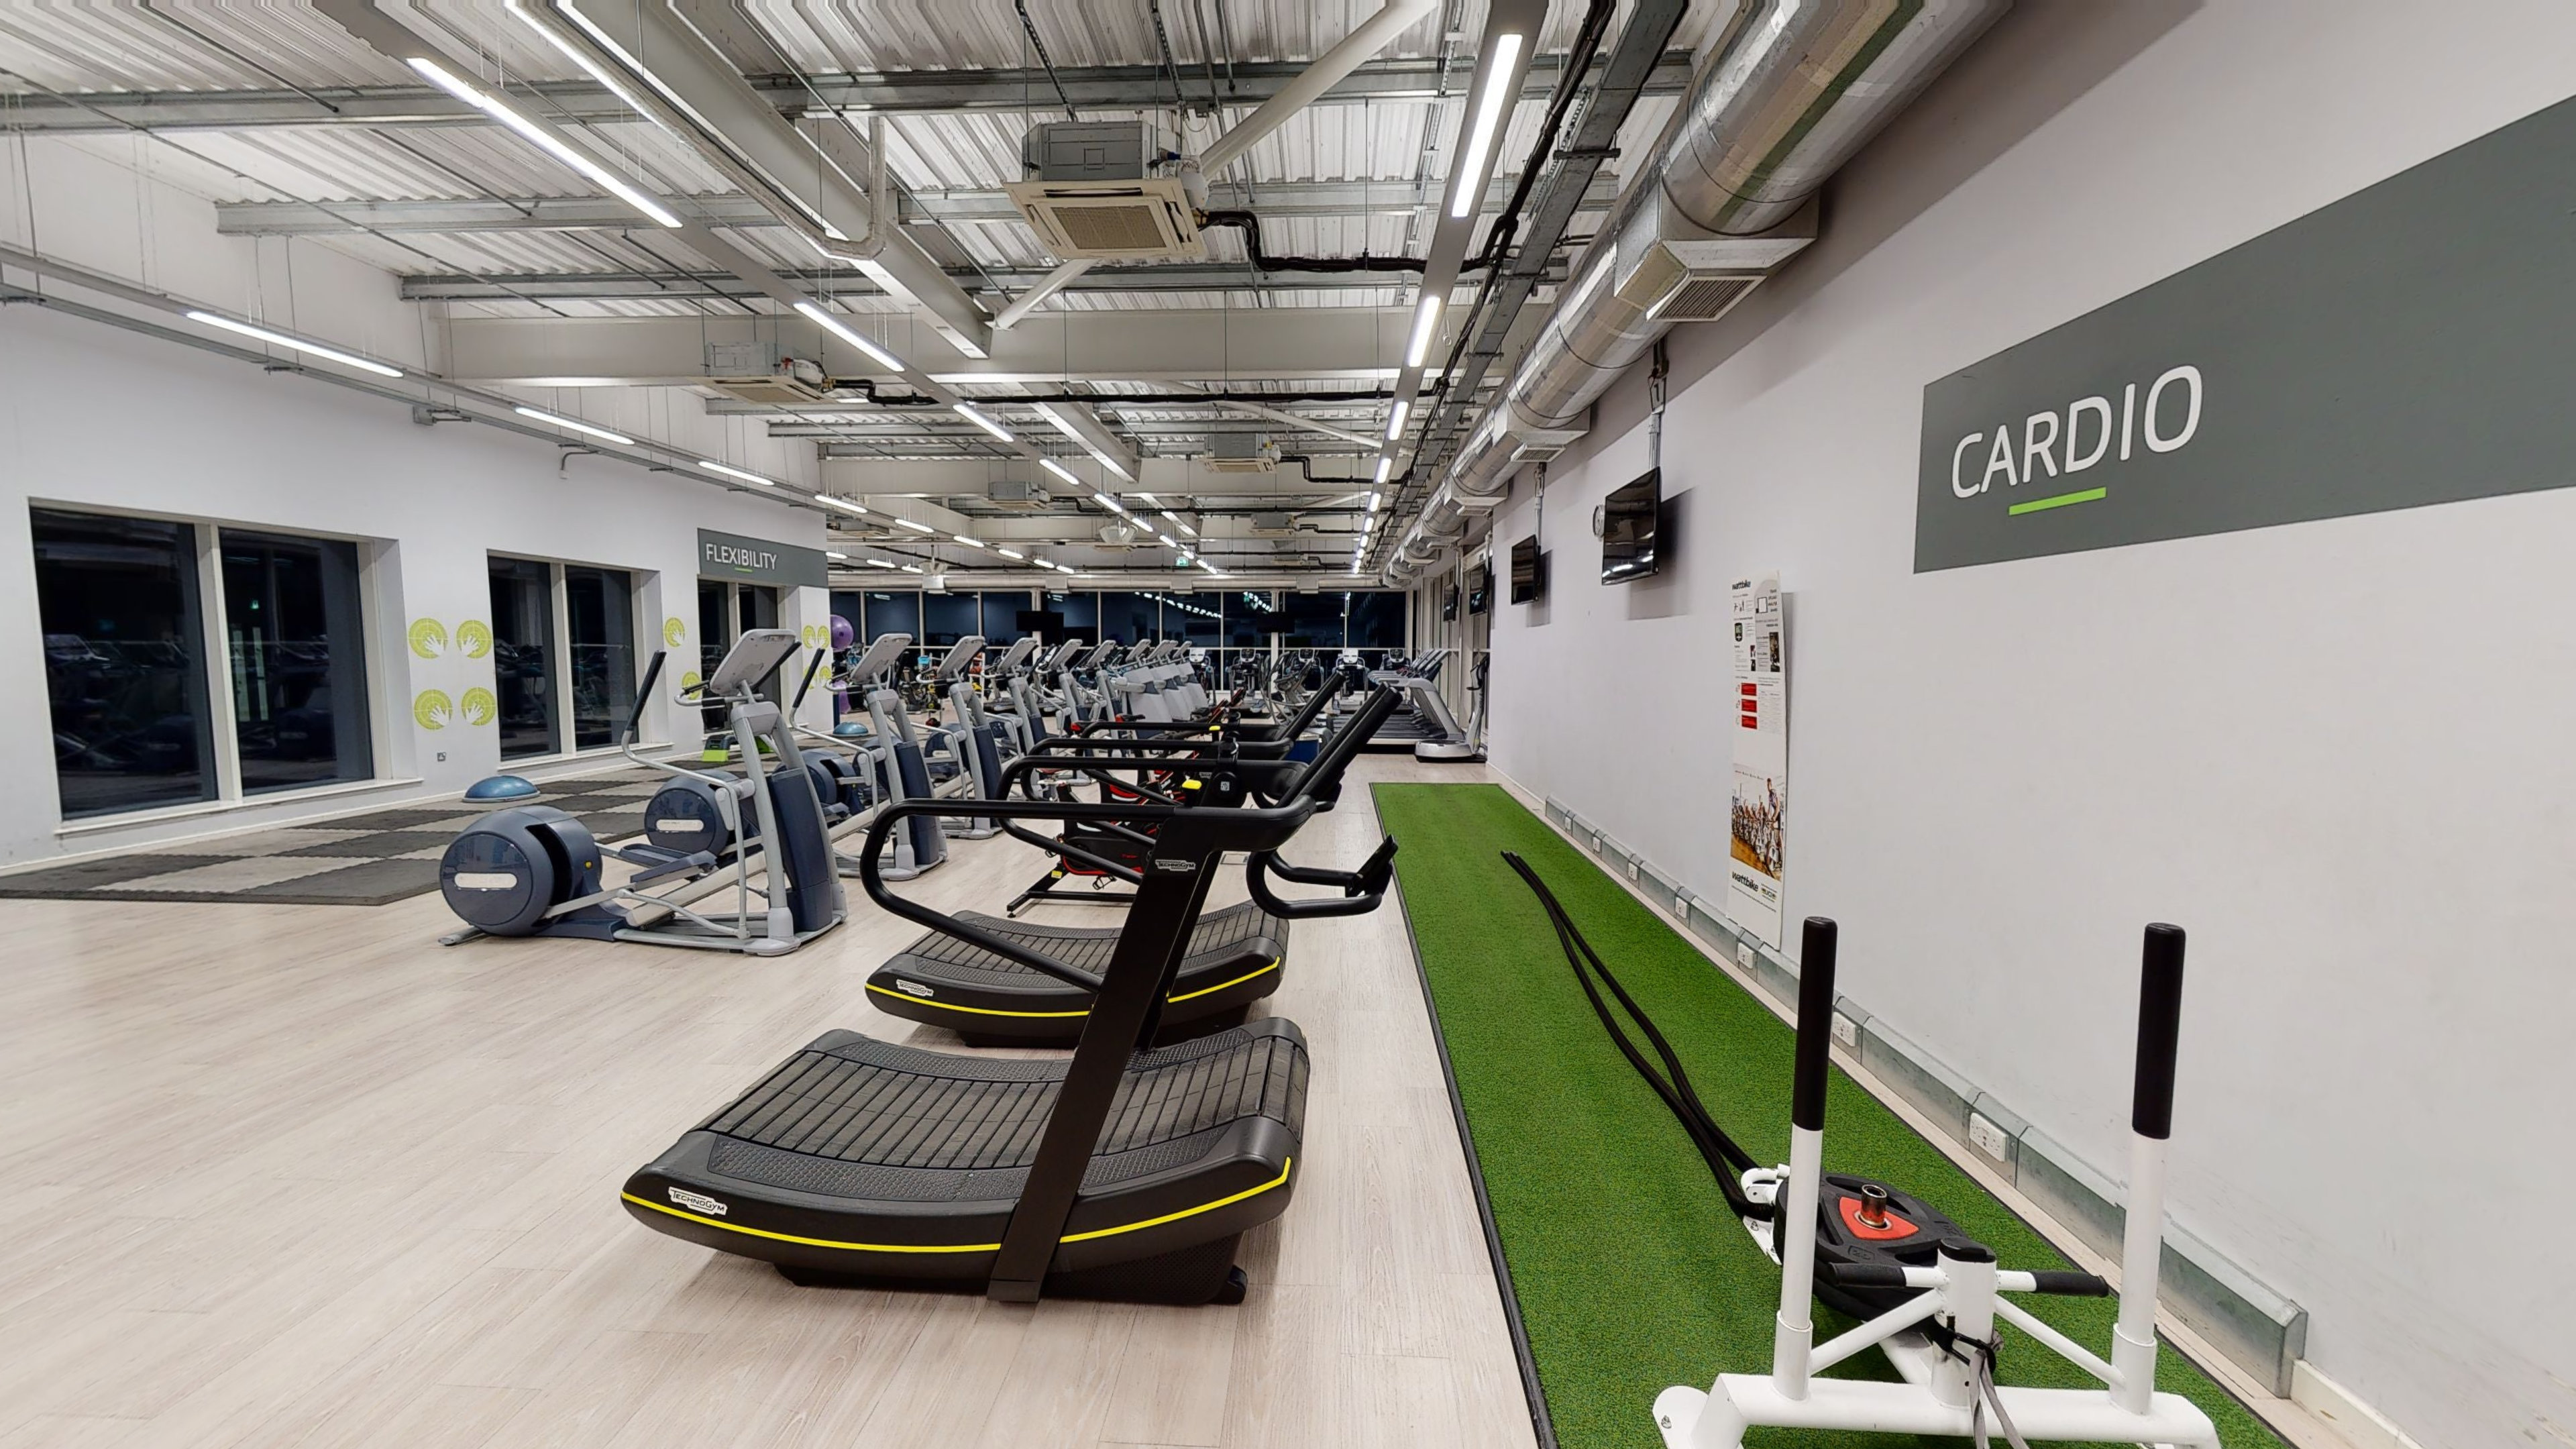 Gym at Graves Health and Sports Centre Graves Health and Sports Centre Sheffield 01142 839900